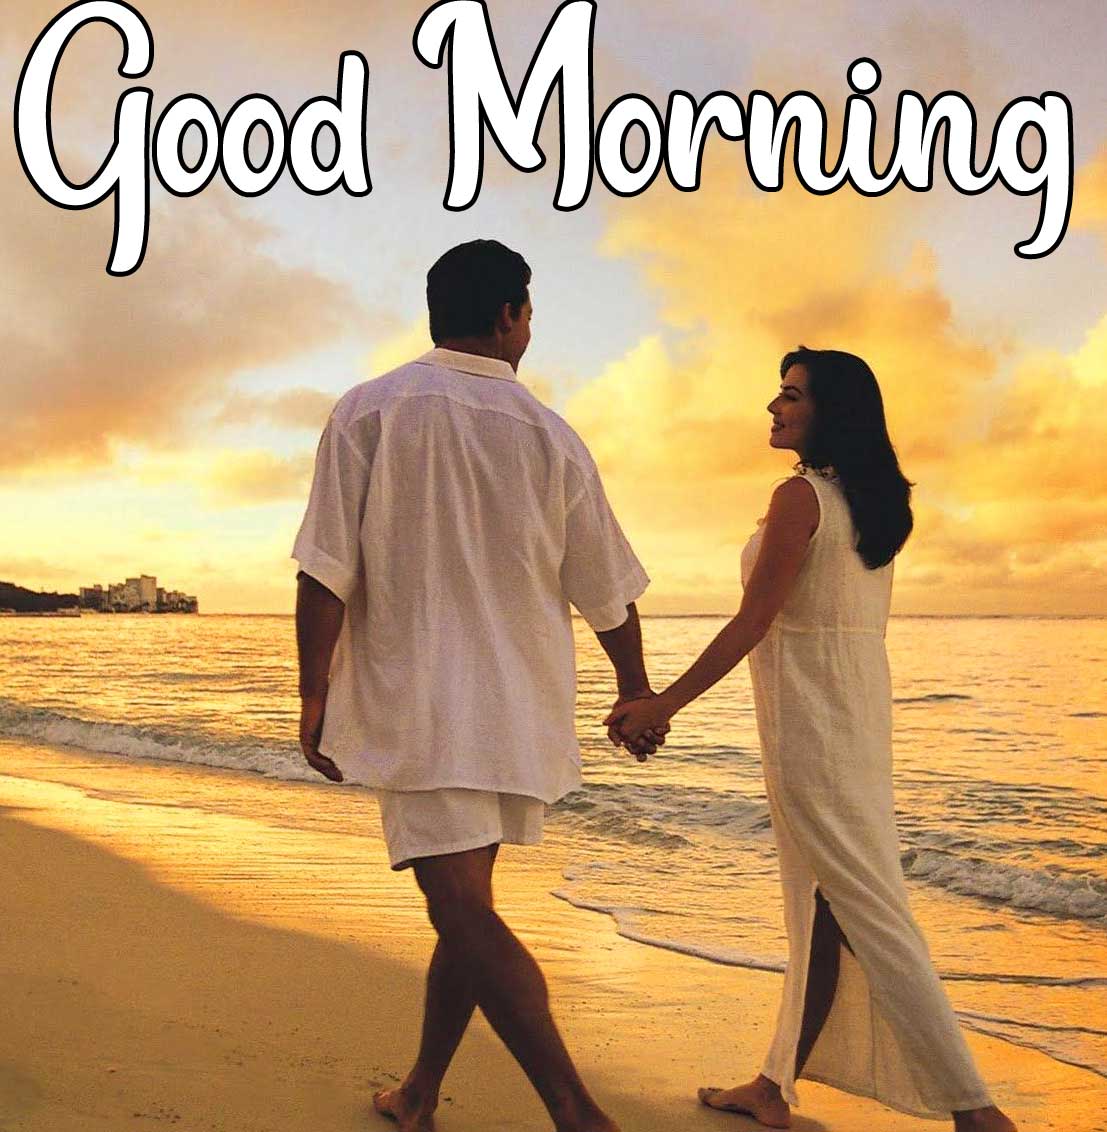 Good Morning Images for Love Couple (81) – Good Morning Images ...